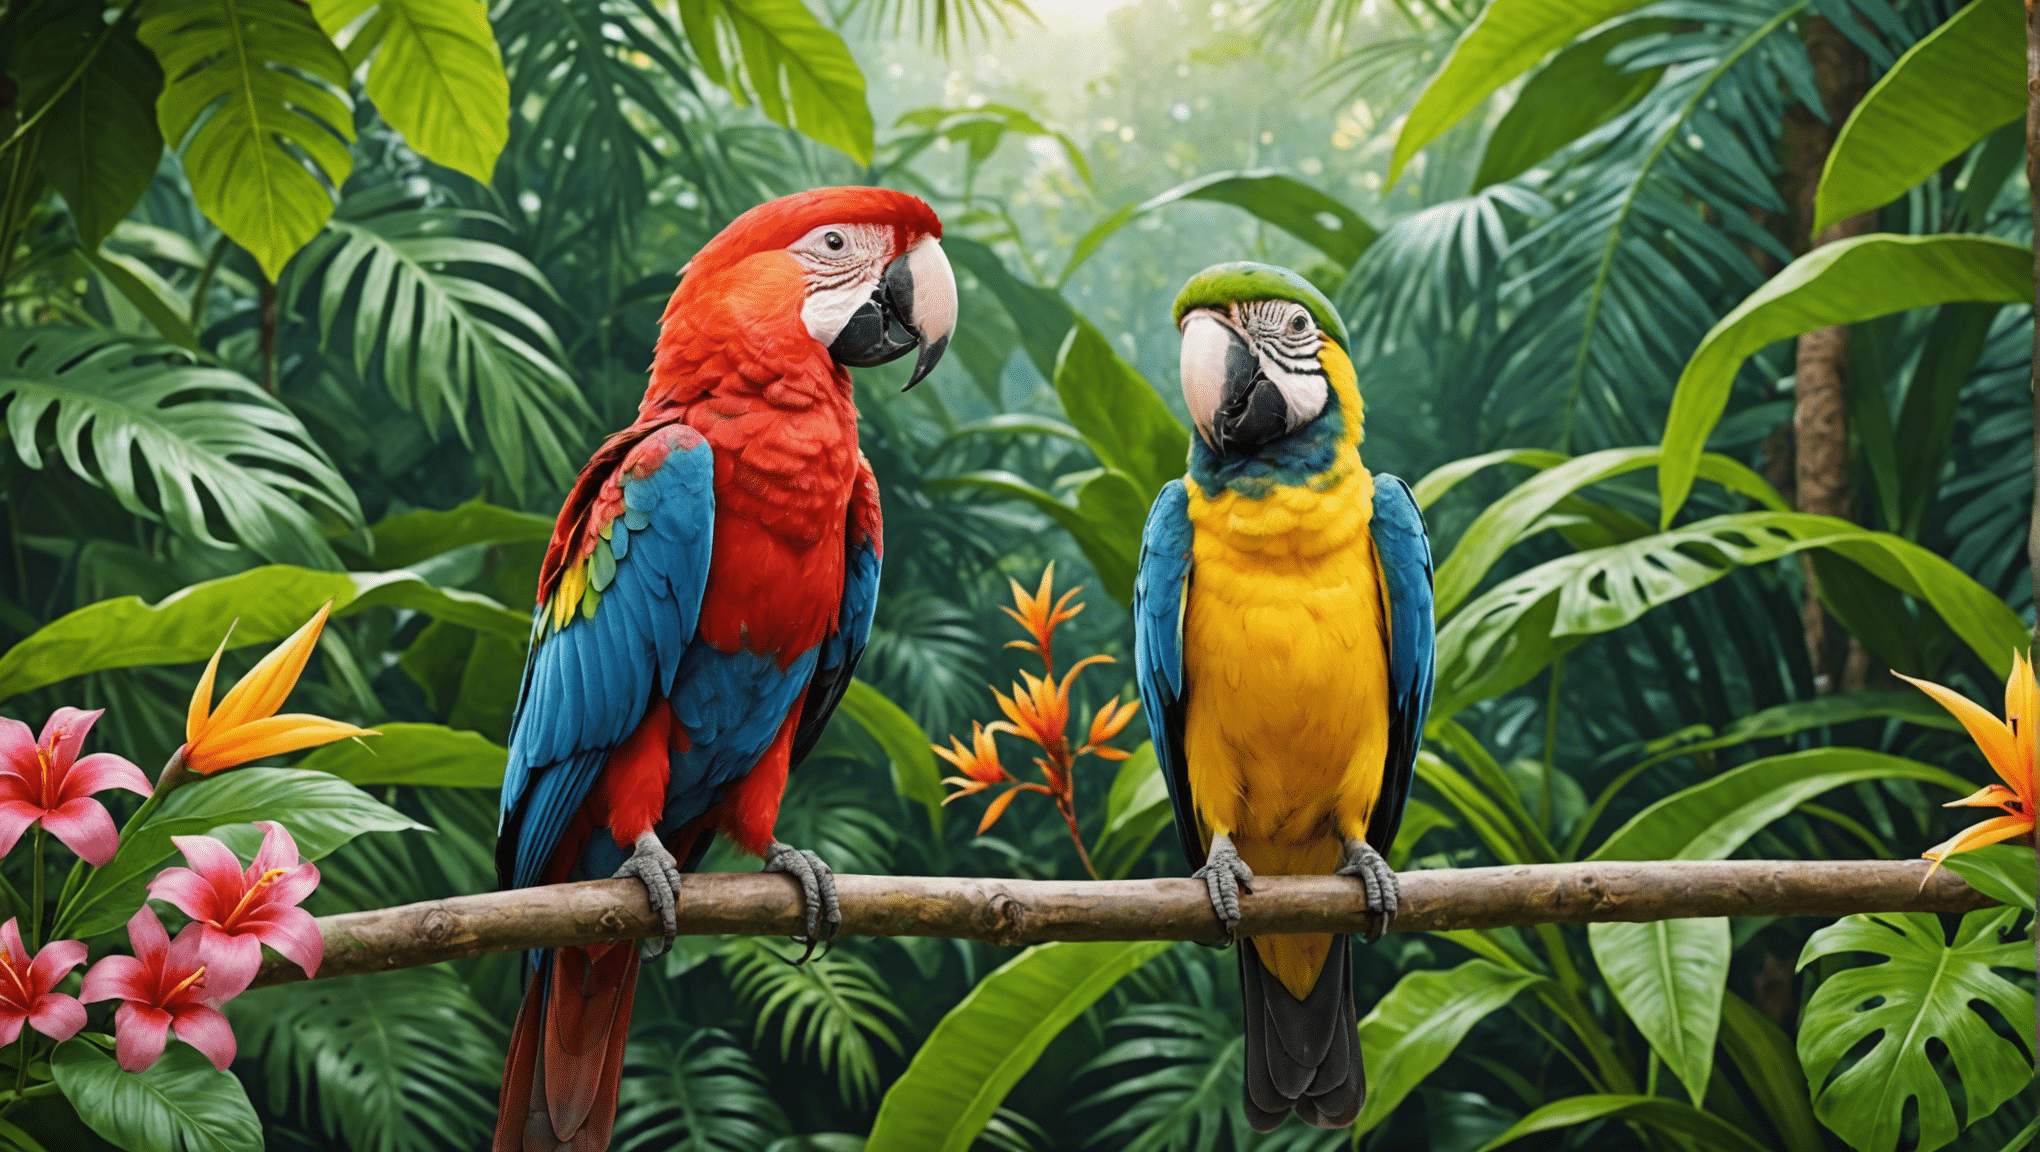 explore the enchanting world of tropical birds with our fascinating collection of articles and images.